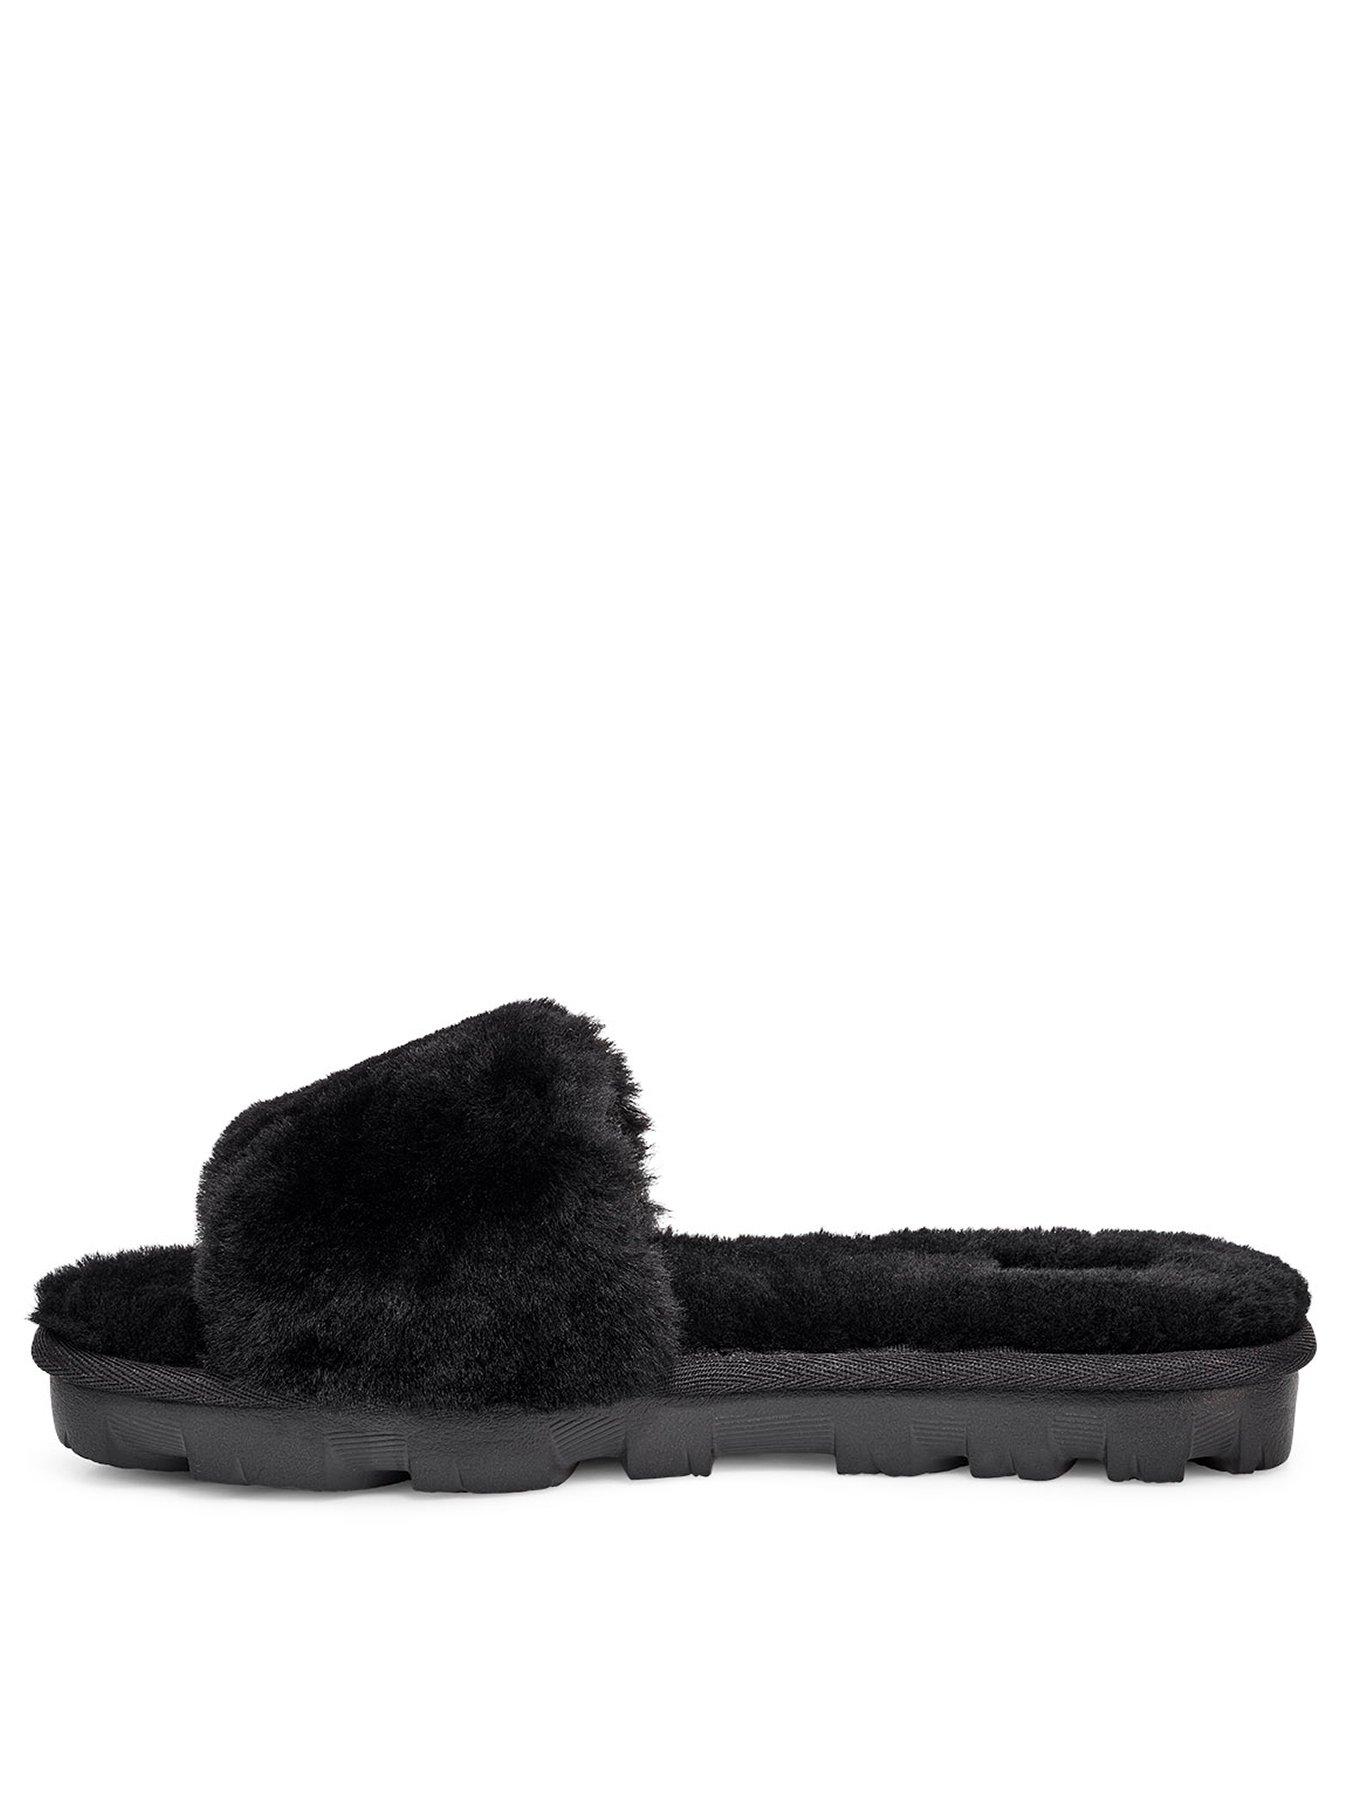 ugg cozette slippers